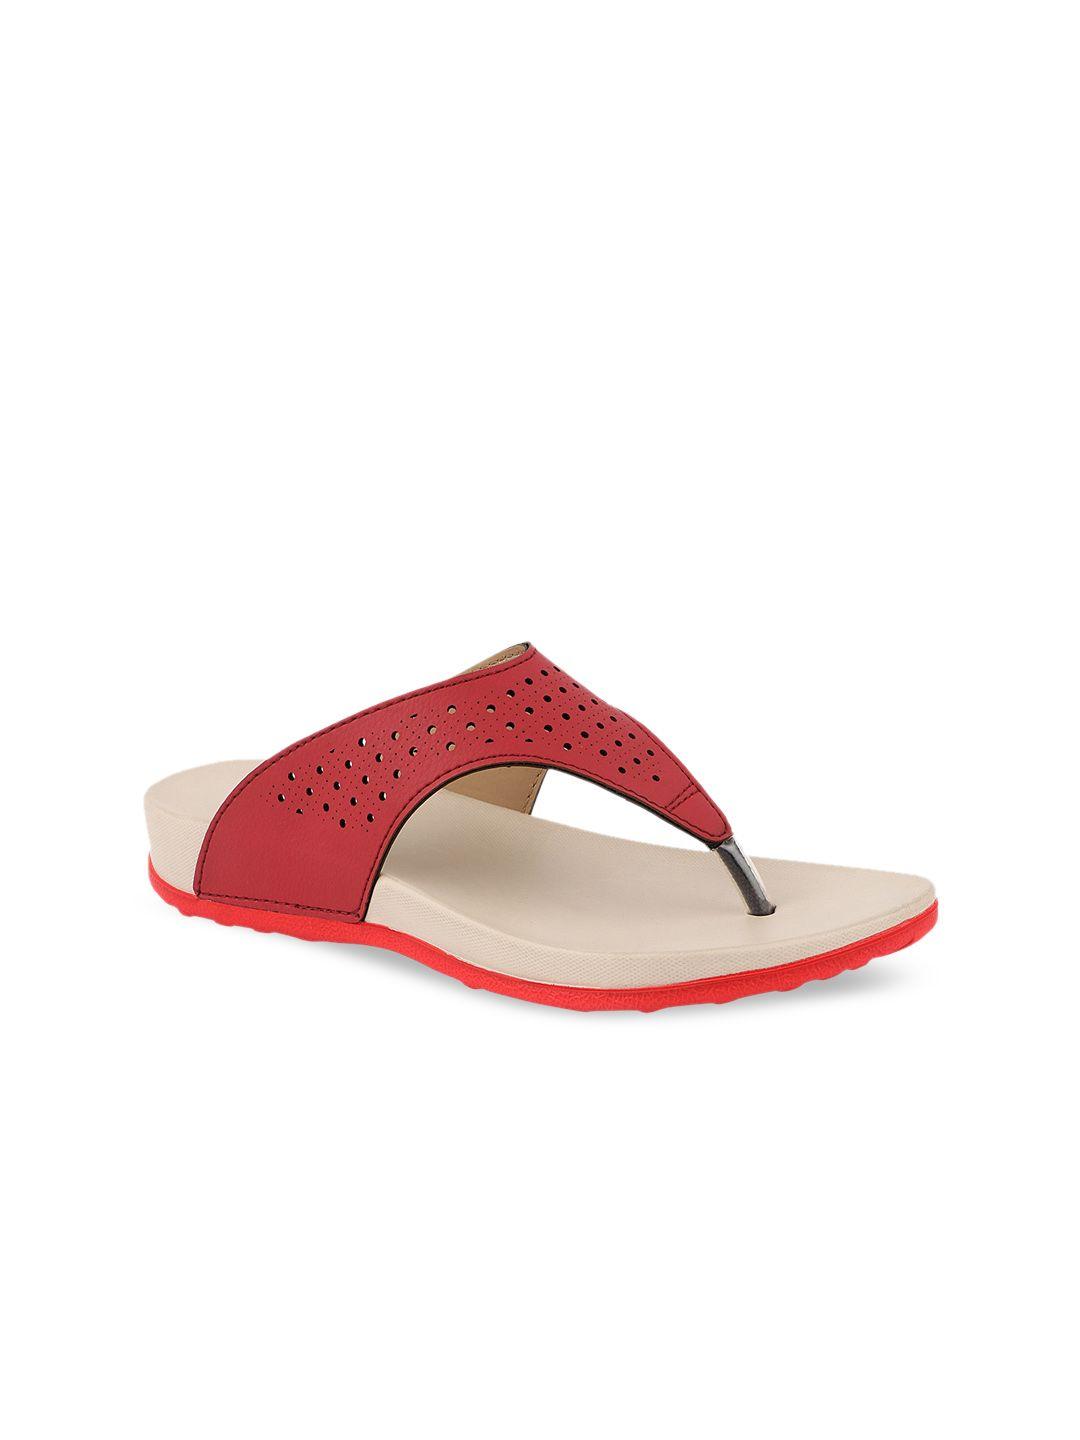 welcome women red ethnic t-strap flats with laser cuts